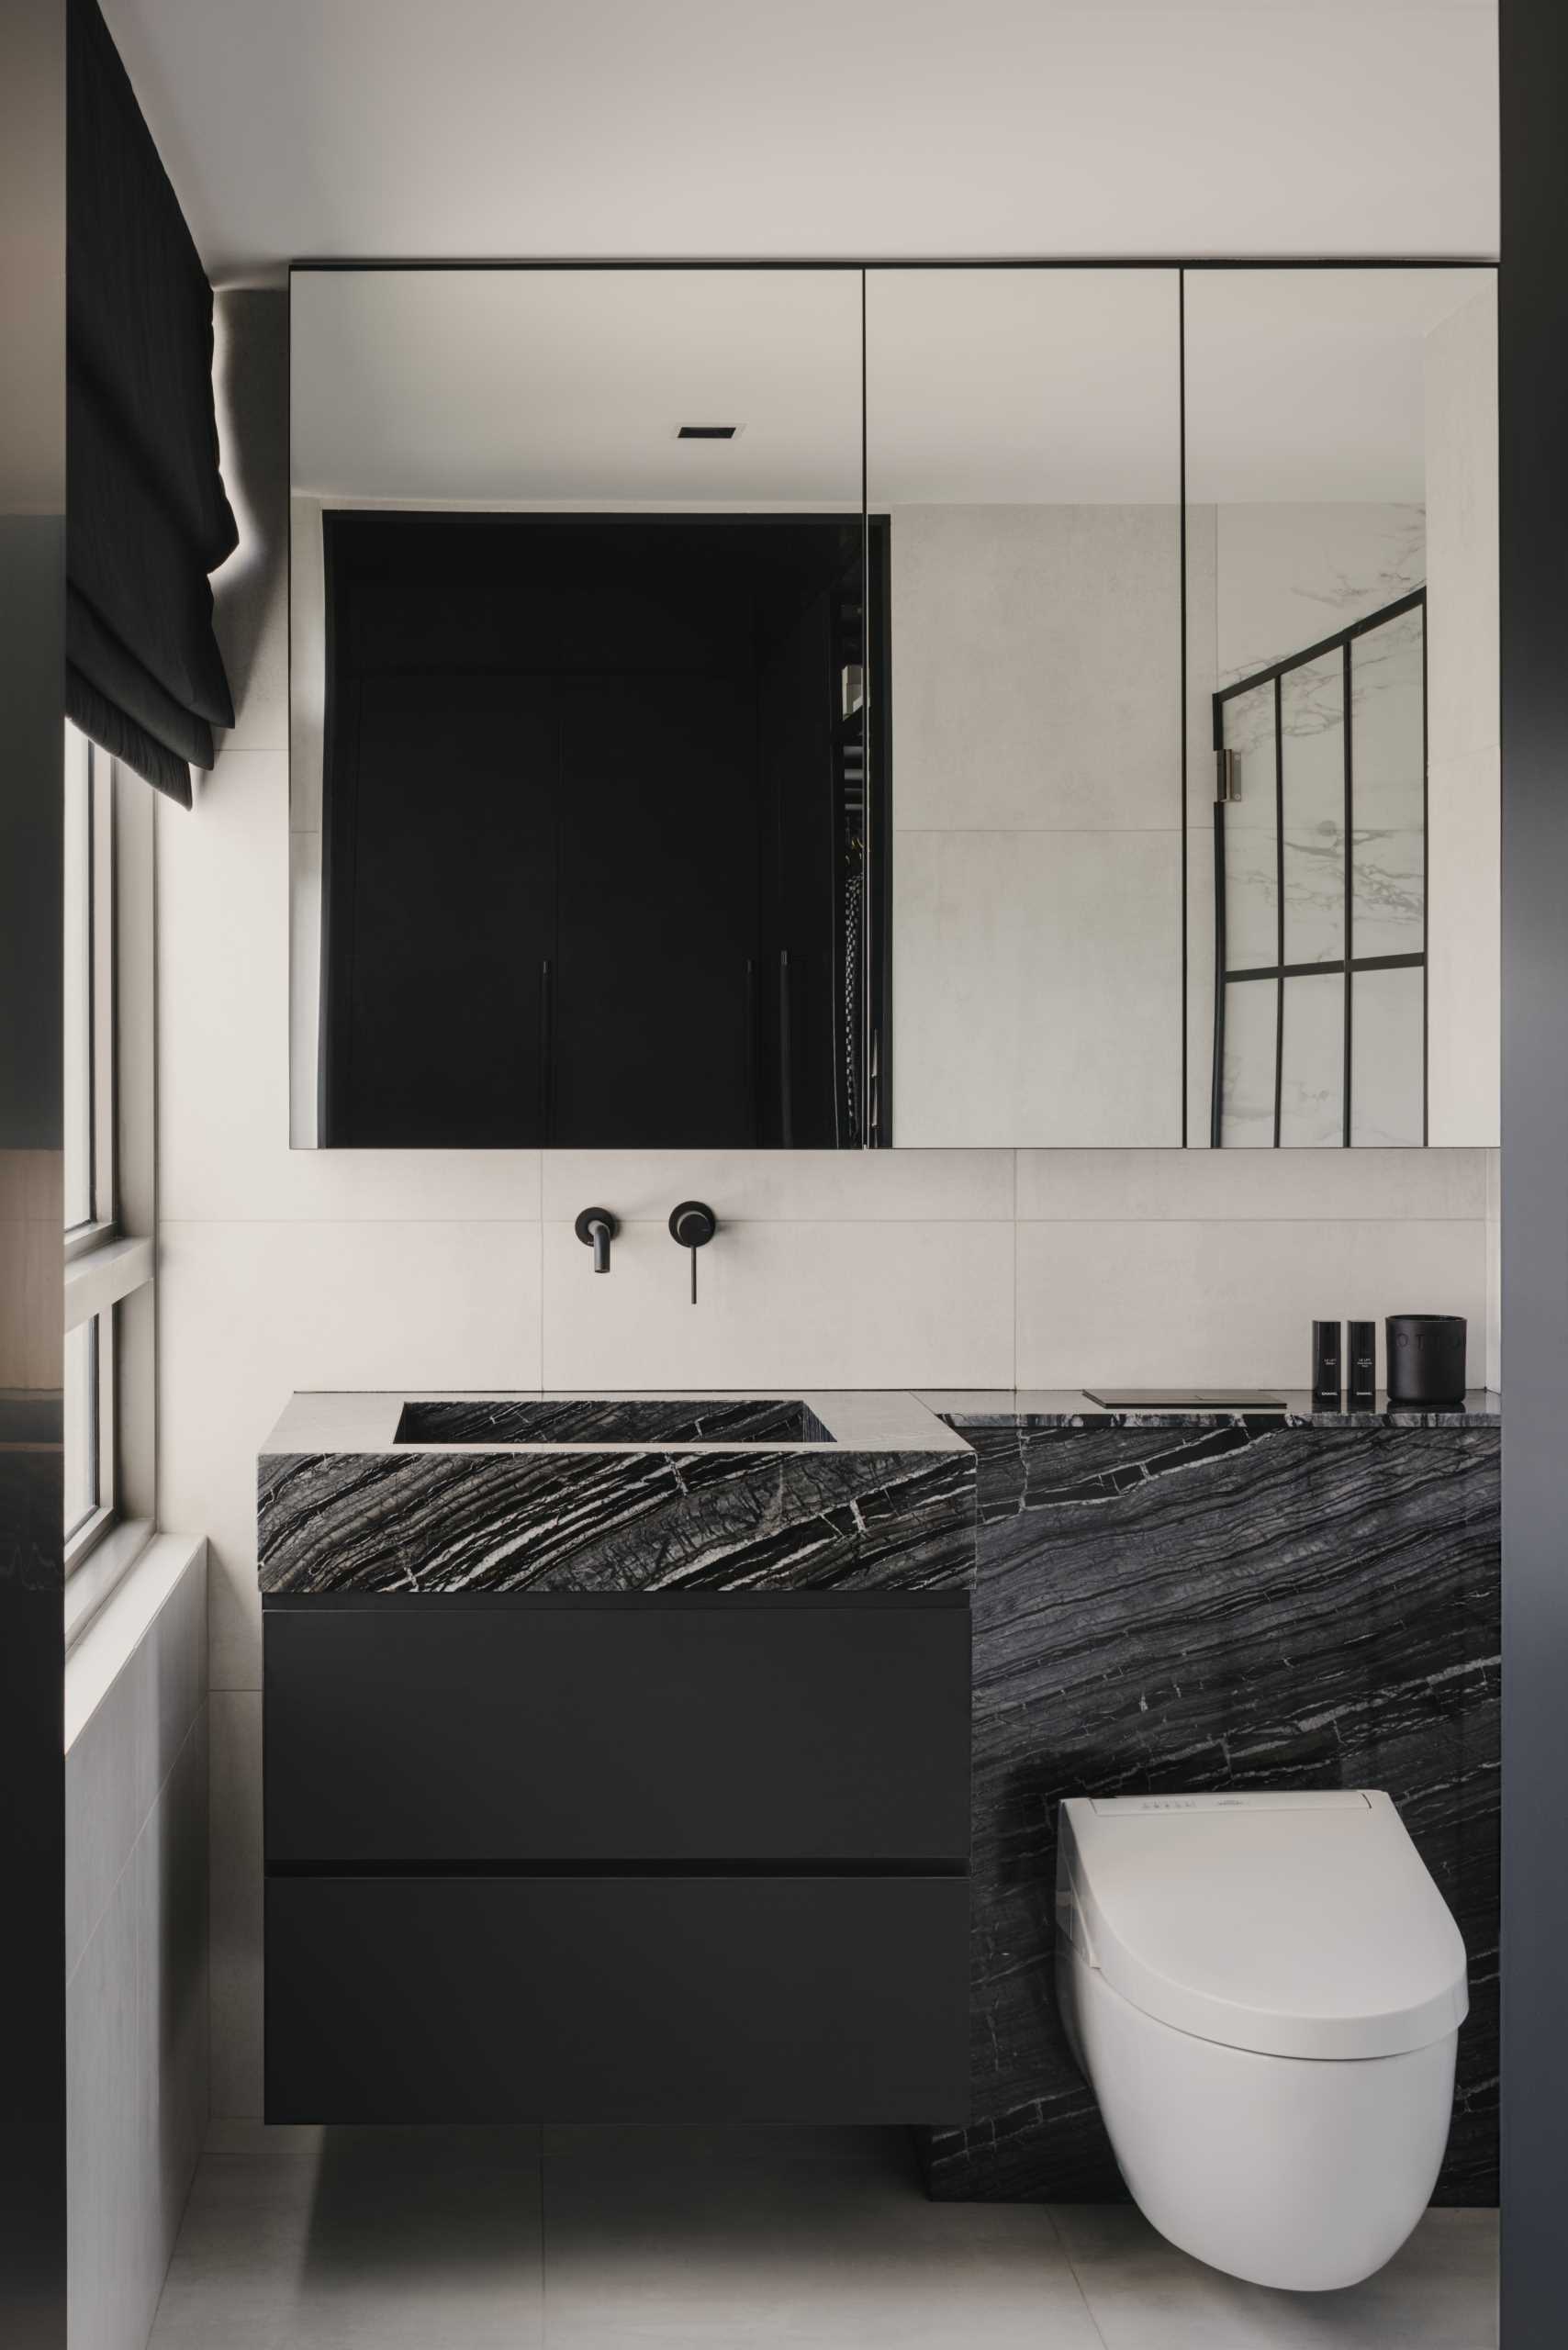 A modern bathroom with a monochrome theme, includes a black vanity, a stone countertop, and a s،wer with black accents.